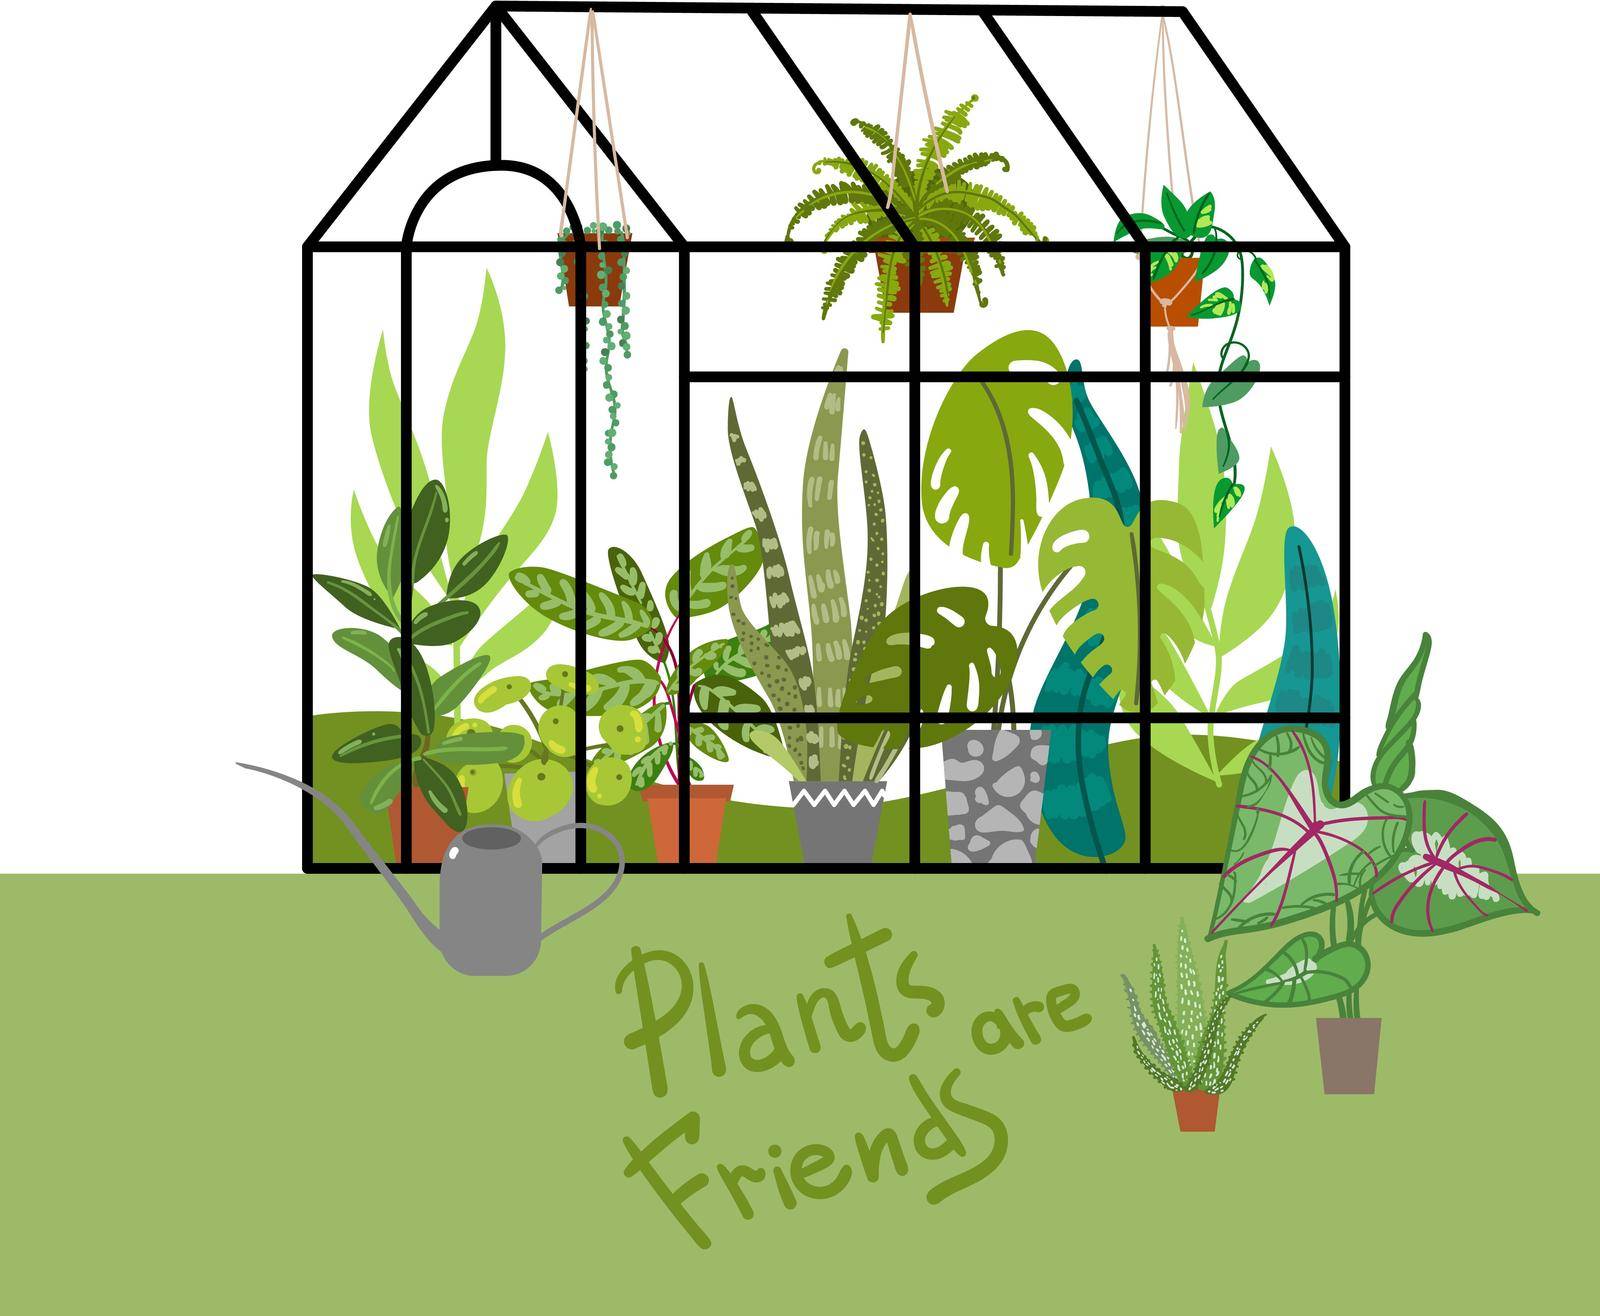 Greenhouse vector illustrations. Urban jungles. Plants are friends. Culd be used for web, notebook, phone case, etc